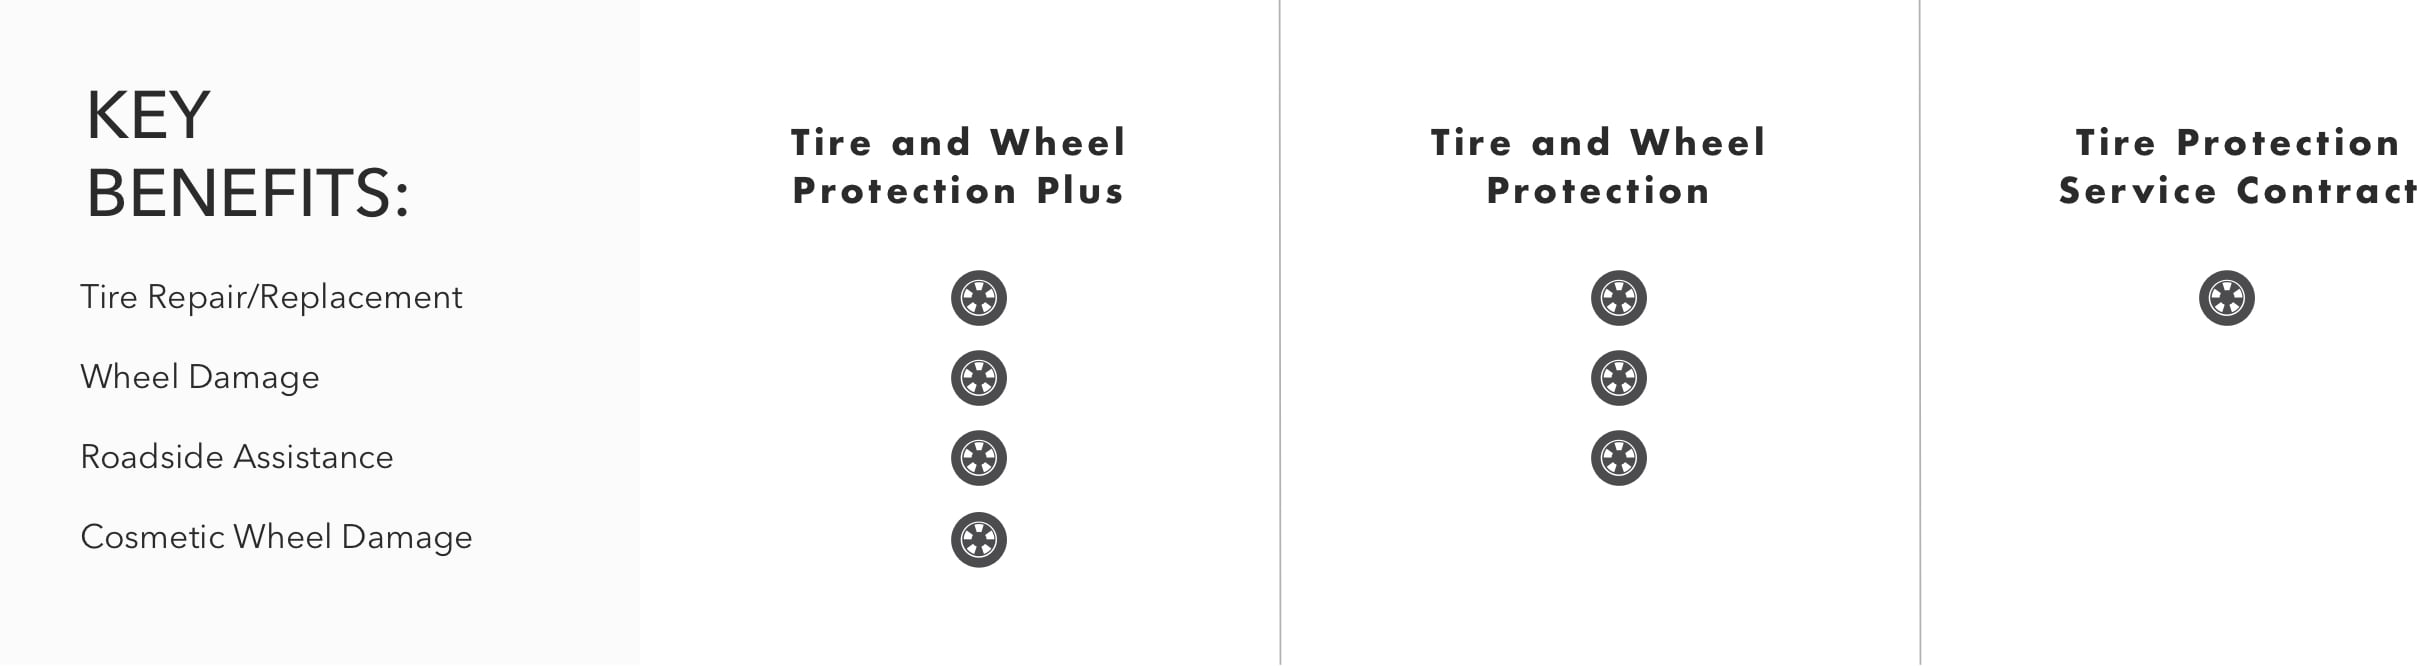 GMC Protection Tire and Wheel Key Benefit Option Comparison Chart